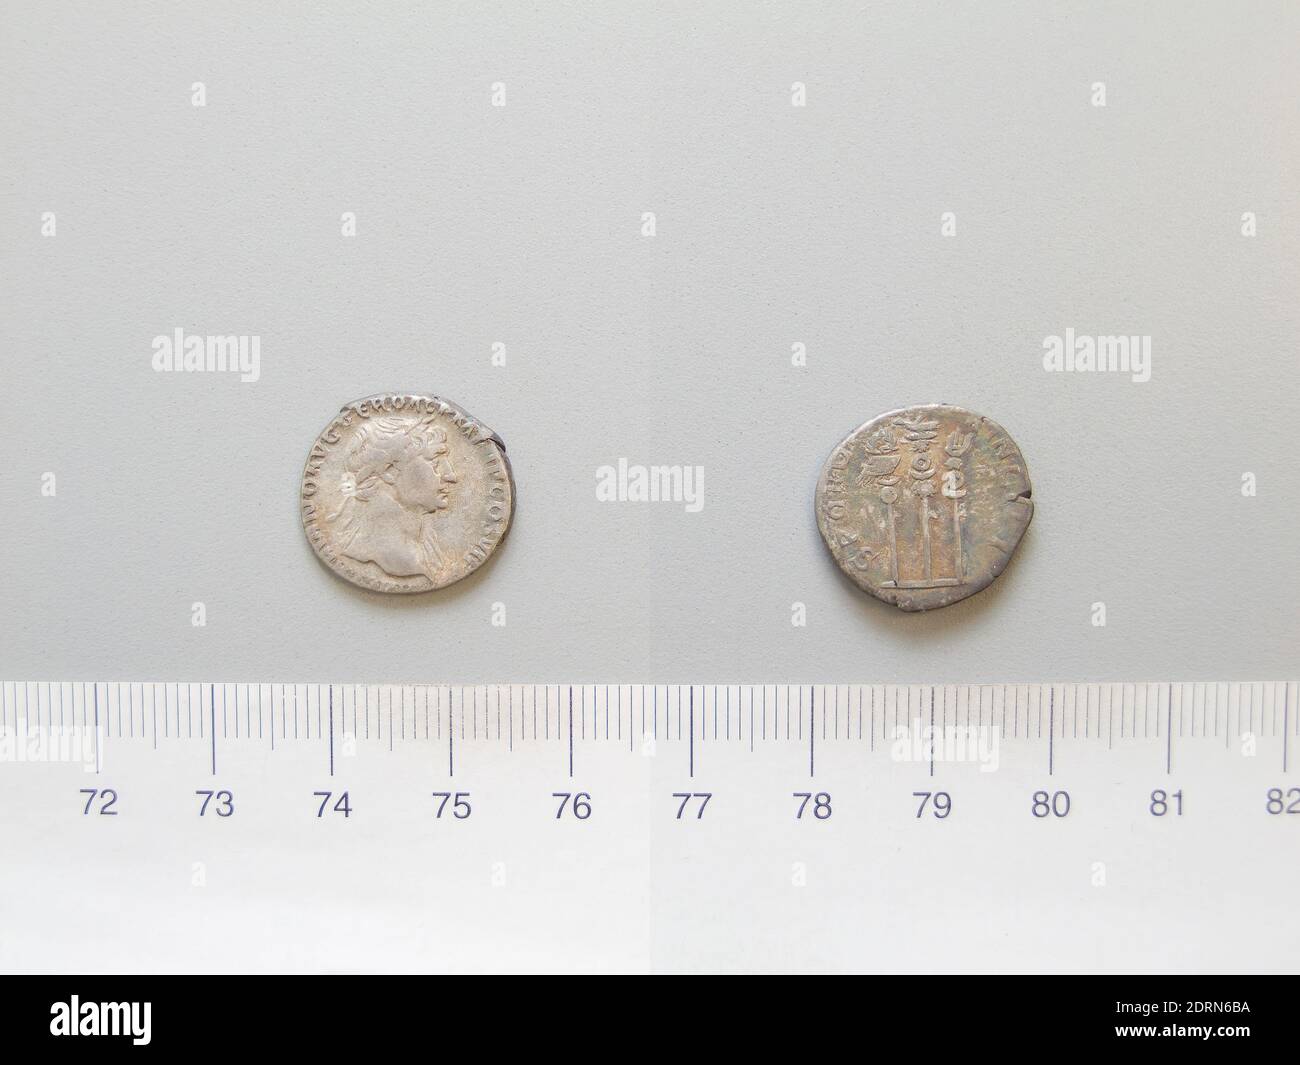 Ruler: Trajan, Emperor of Rome, A.D. 53–117, ruled 98–117, Mint: Rome, Denarius of Trajan, Emperor of Rome from Rome, 112–17, Silver, 2.82 g, 7:00, 18 mm, Made in Rome, Italy, Roman, 2nd century, Numismatics Stock Photo